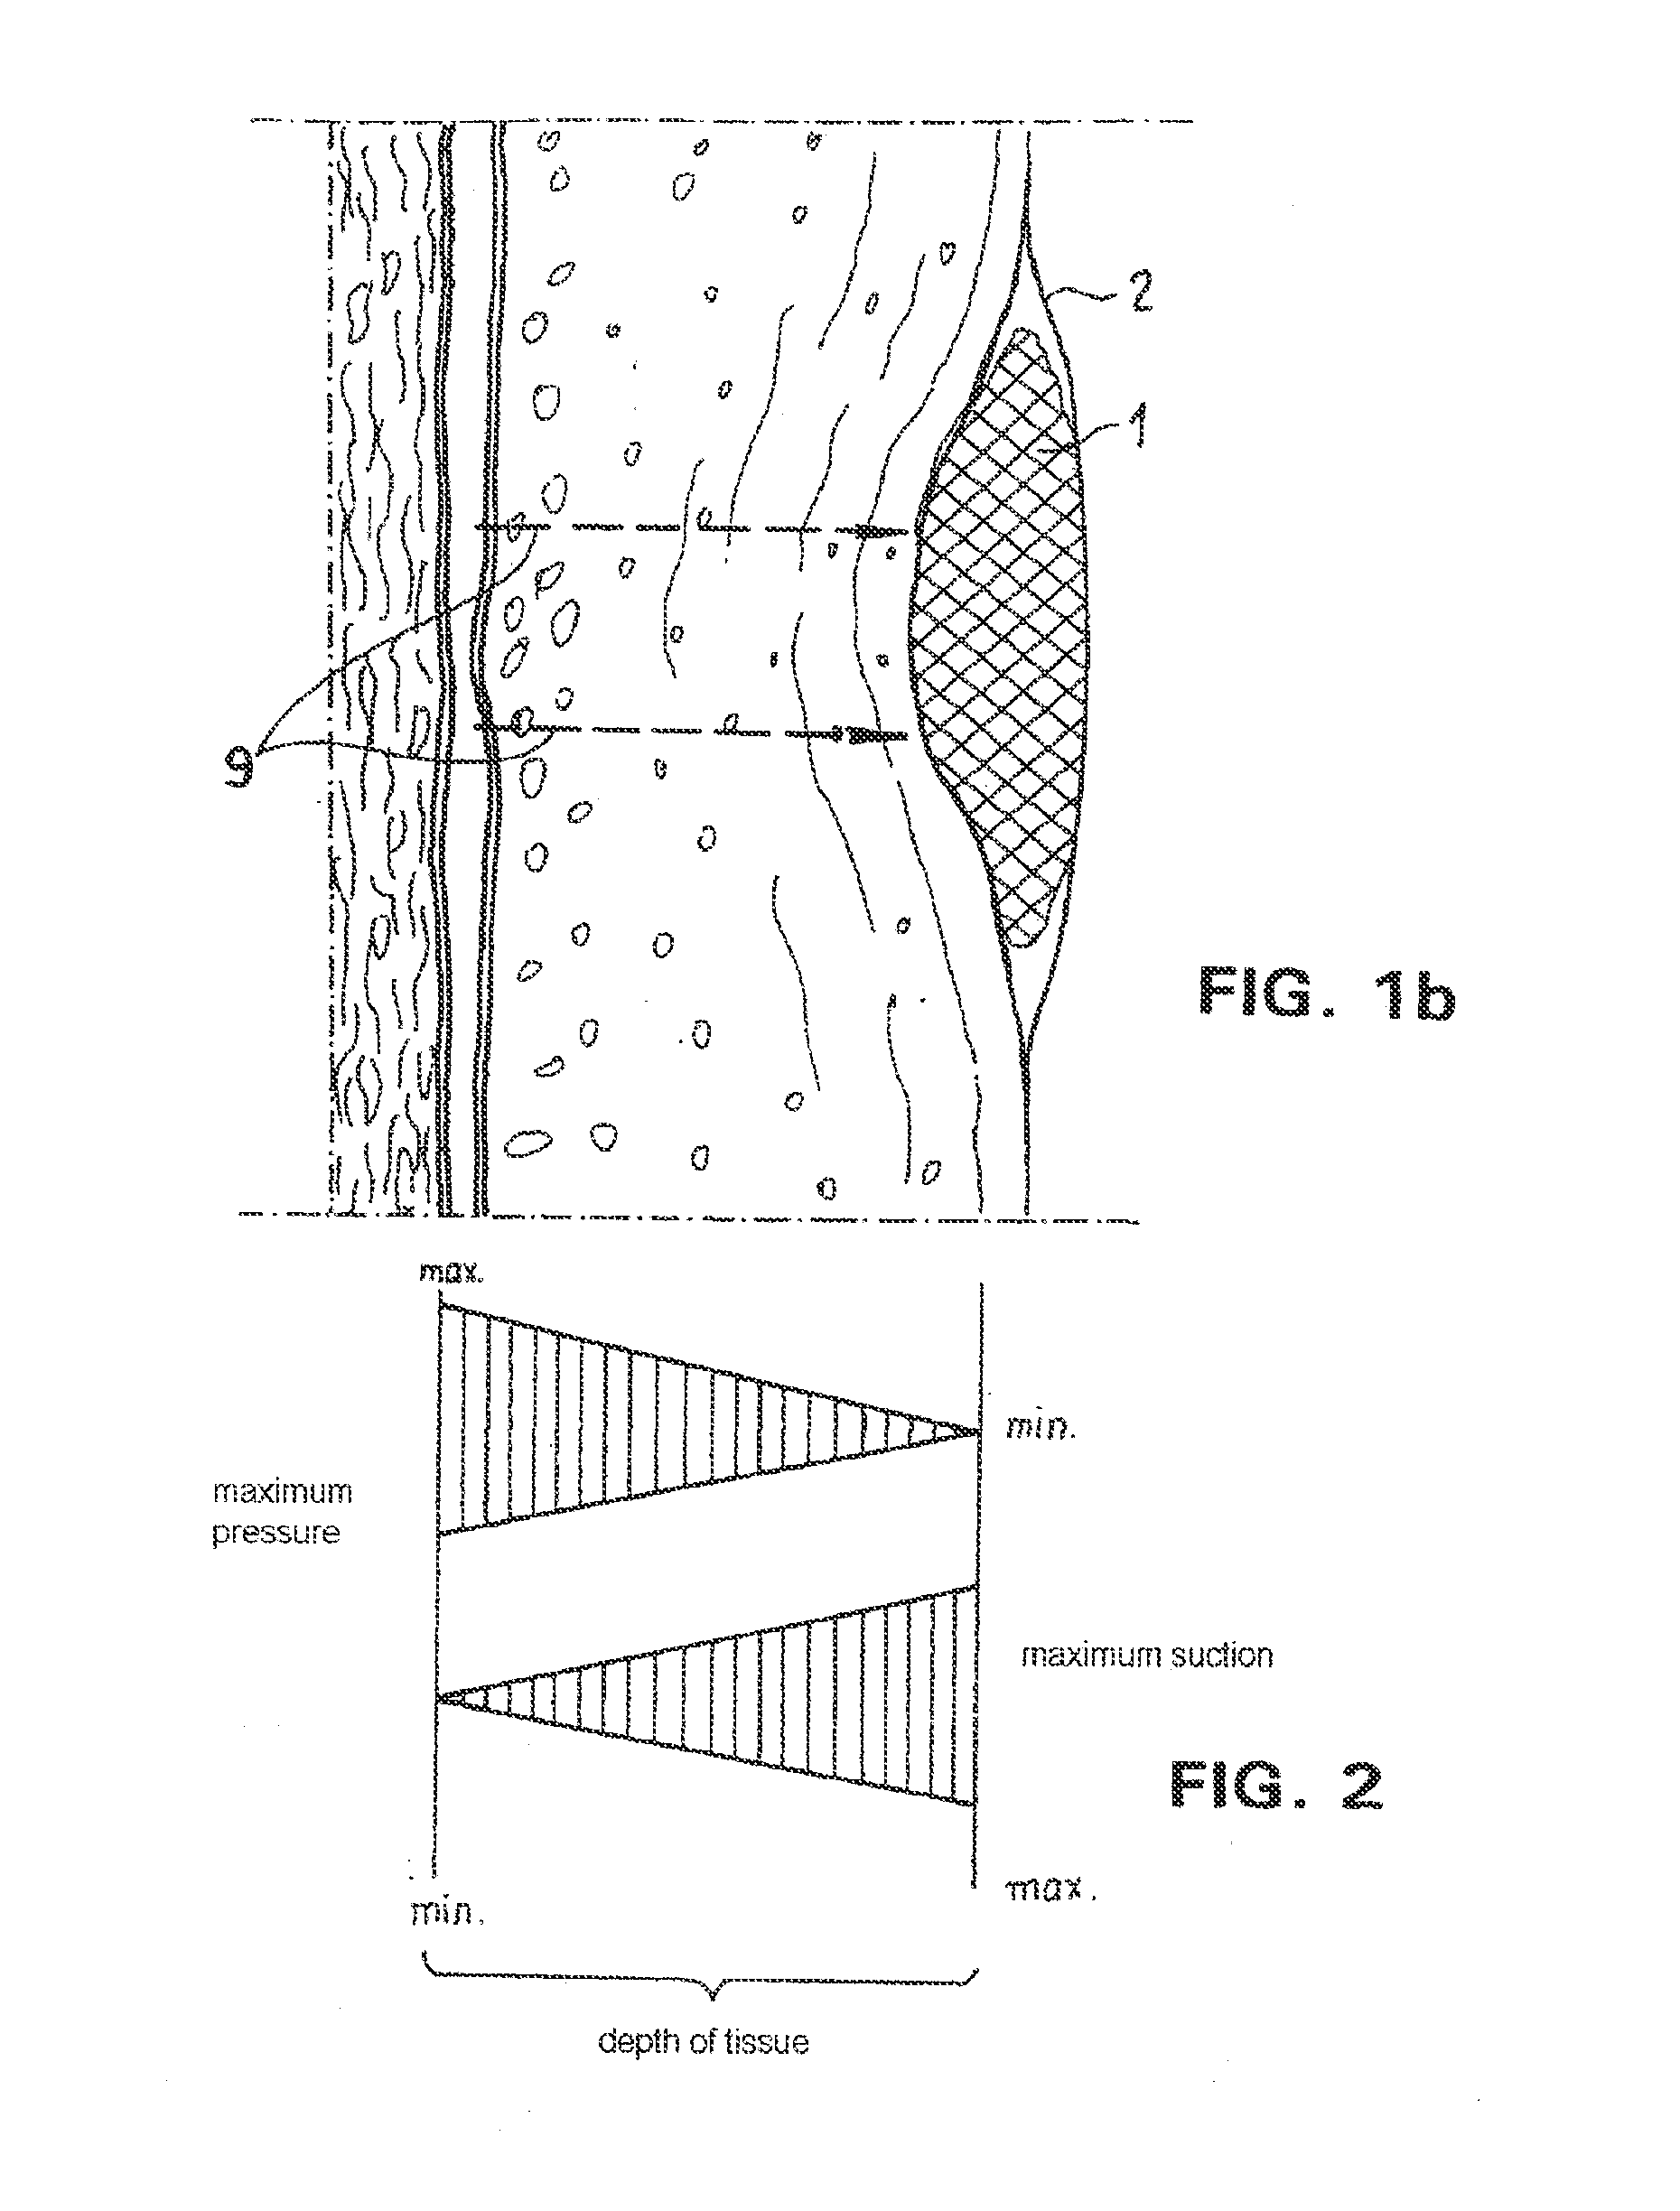 Absorbent article for application to human or animal skin surfaces